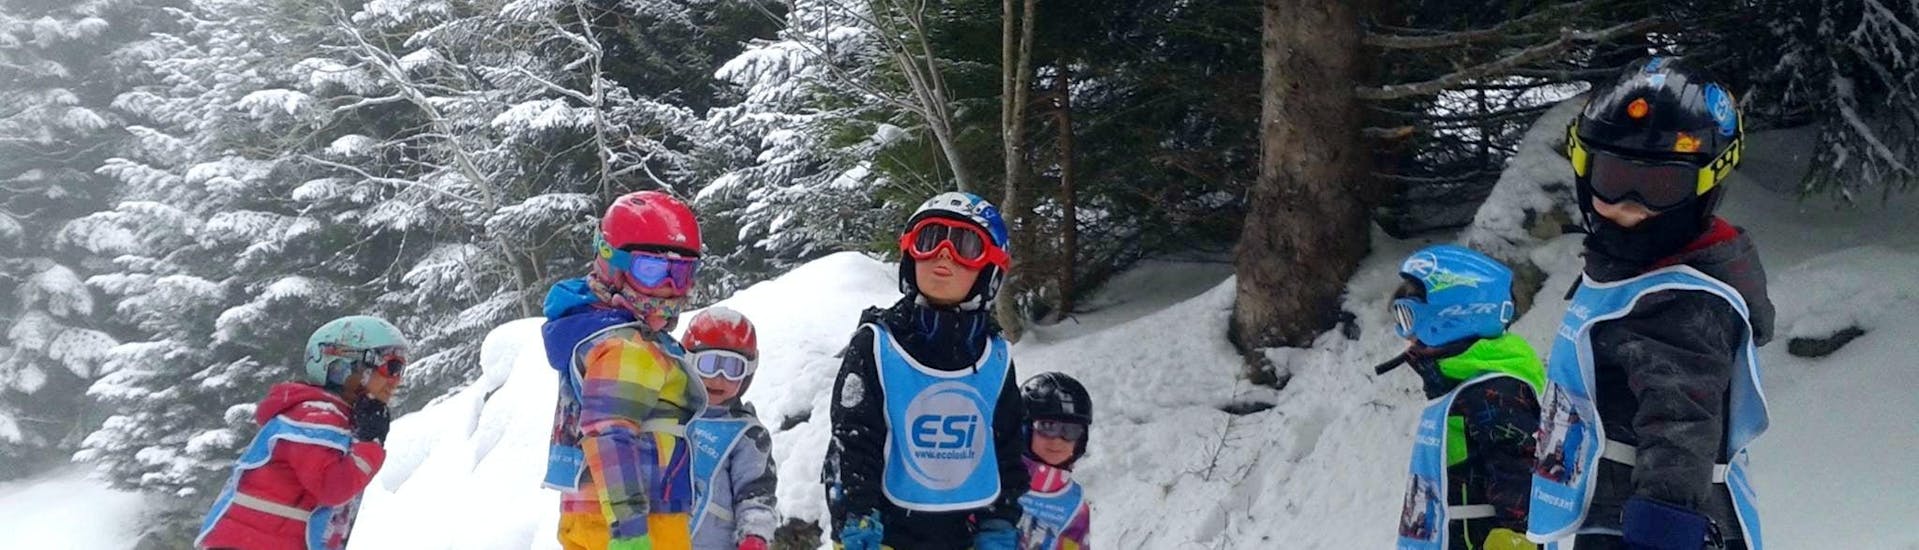 Kids are standing in the middle of the slopes surrounded by trees during their Kids Ski Lessons (3-11 years) - Holiday - Morning -1st Timer with the ski school ESI Ecoloski Barèges.